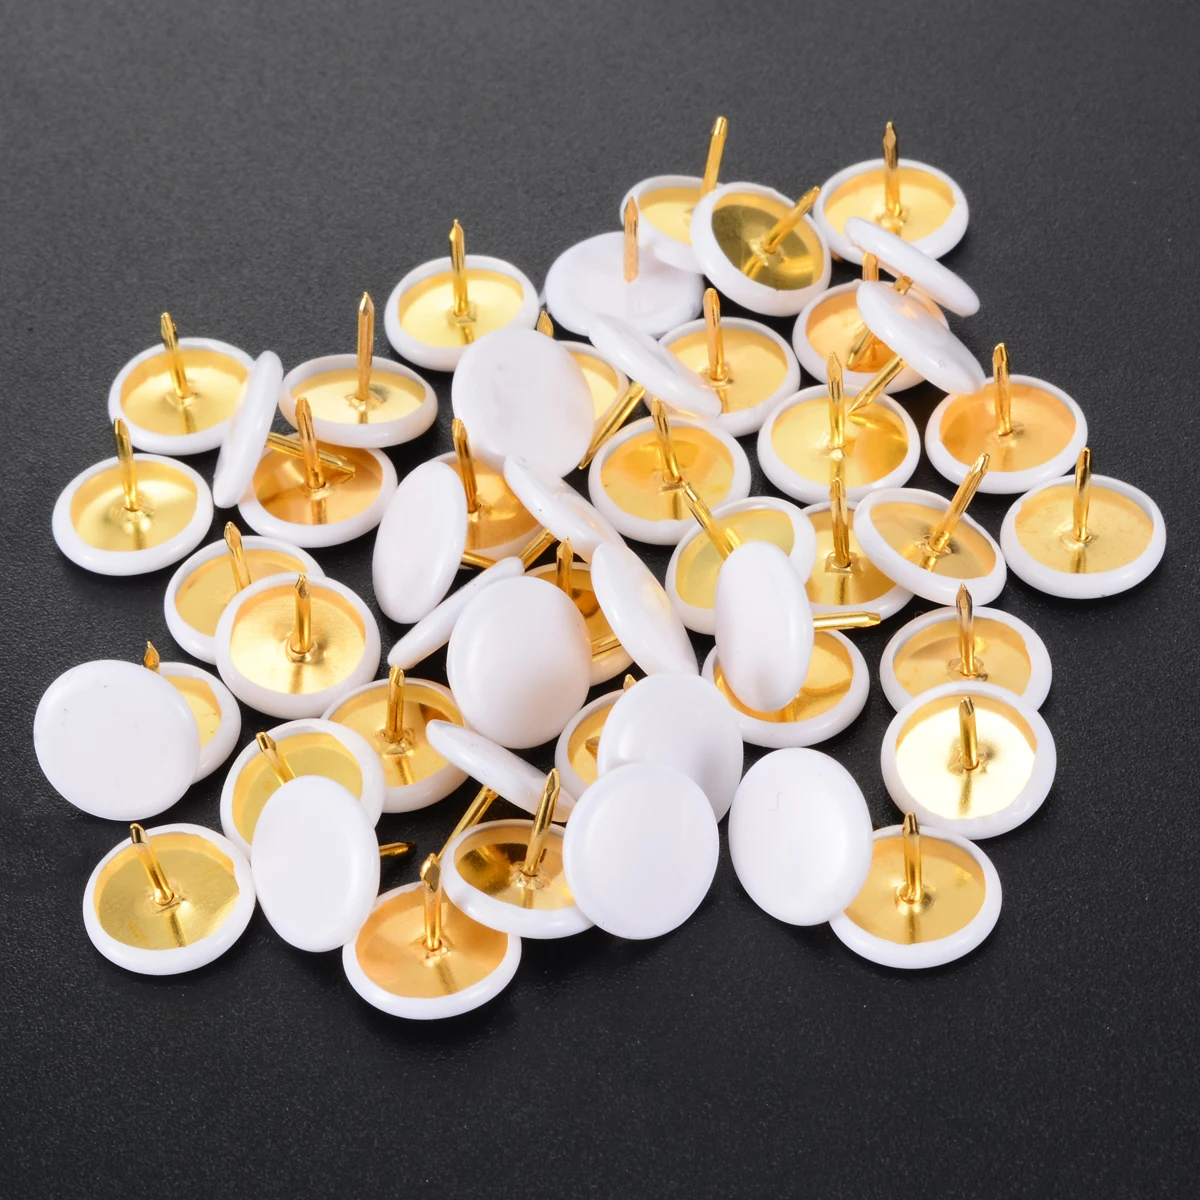 50pcs White Round Shape Push Pins Thumb Tacks for Office School Notice Board Cork Board Paper